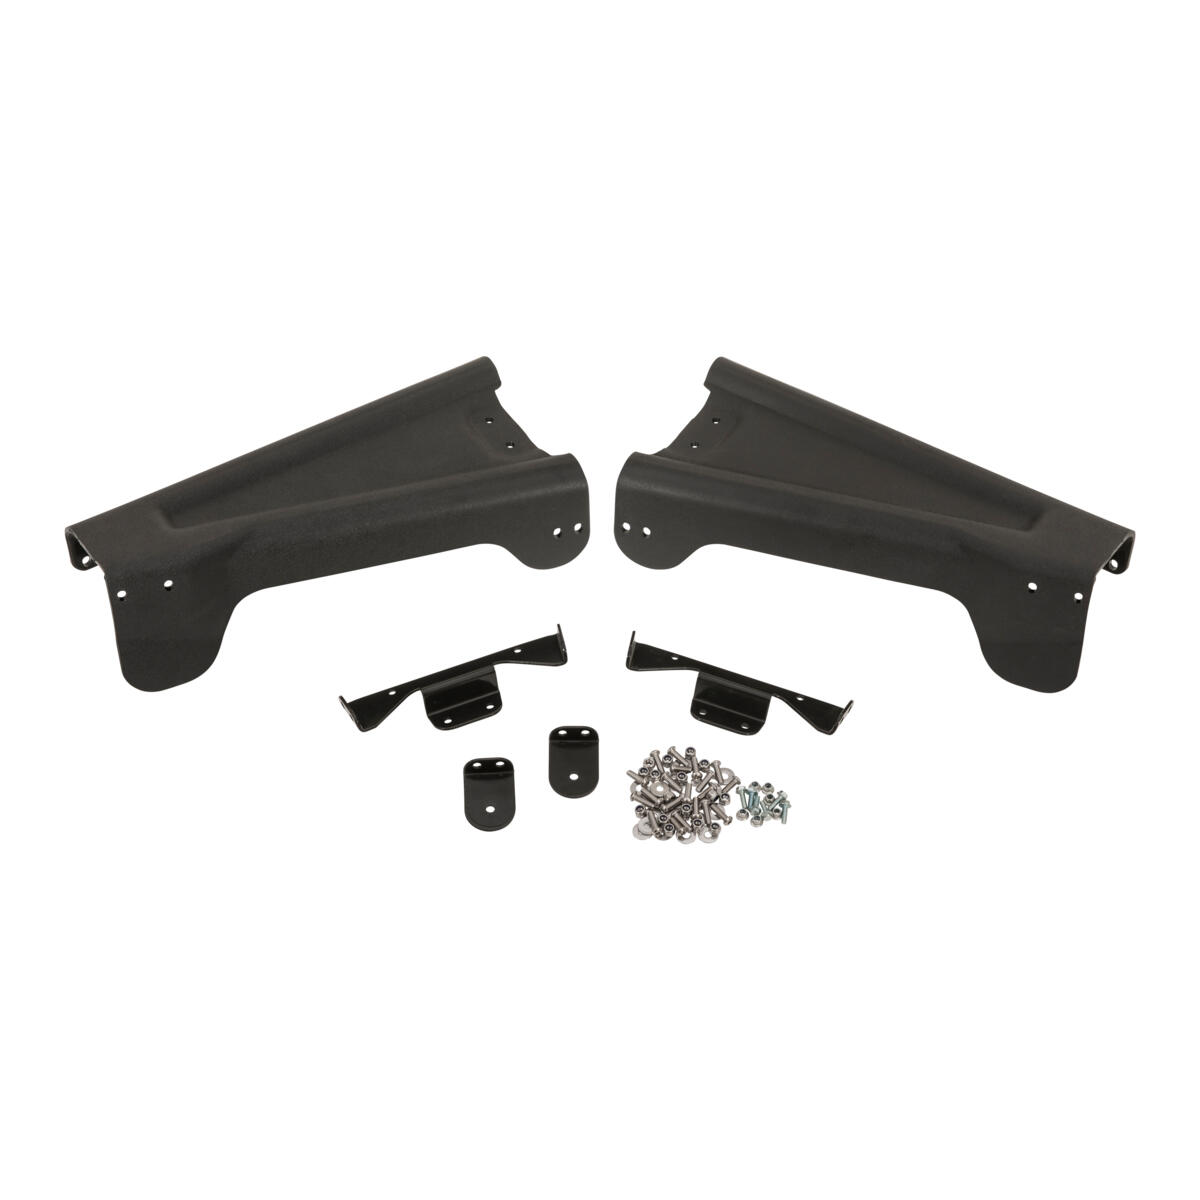 These lightweight high-impact plastic (HMWPE) guards provide additional protection to the front A-Arms, steering, and drive components.